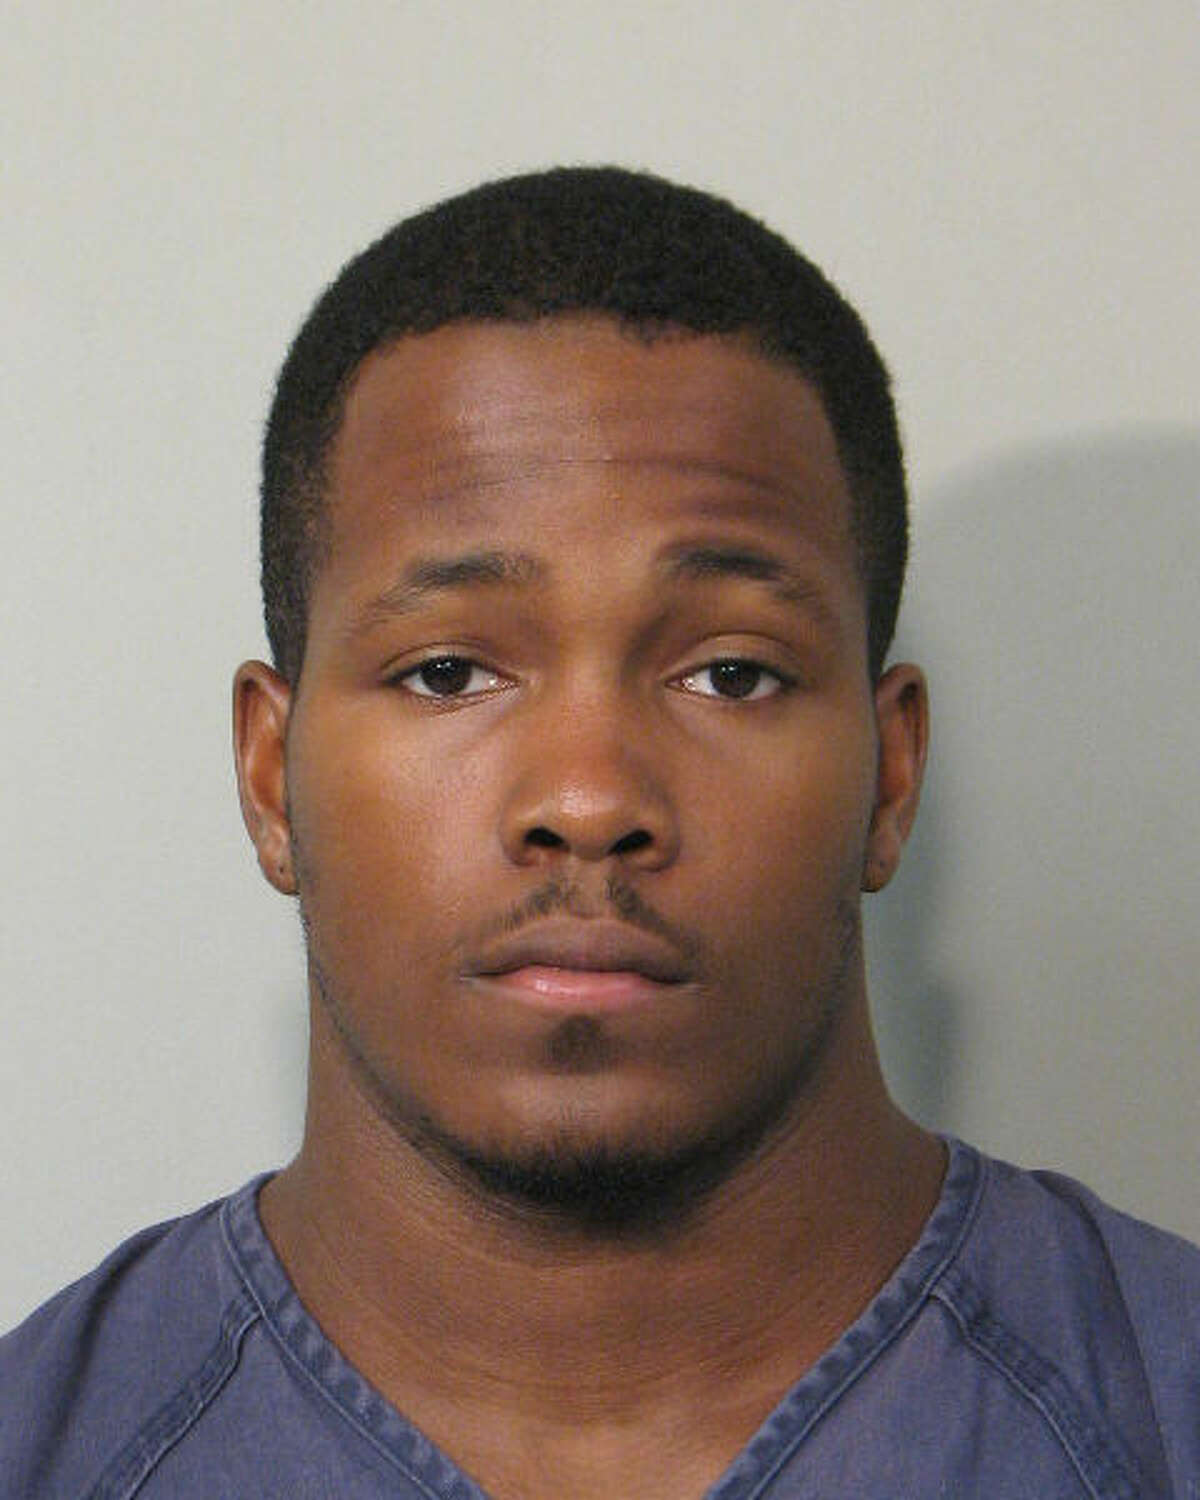 Carl Flowers, 18, was charged with murder for allegedly shooting to death Joseph Estrada, 20, at 7101 W. Fuqua Street on Aug. 12, 2019.